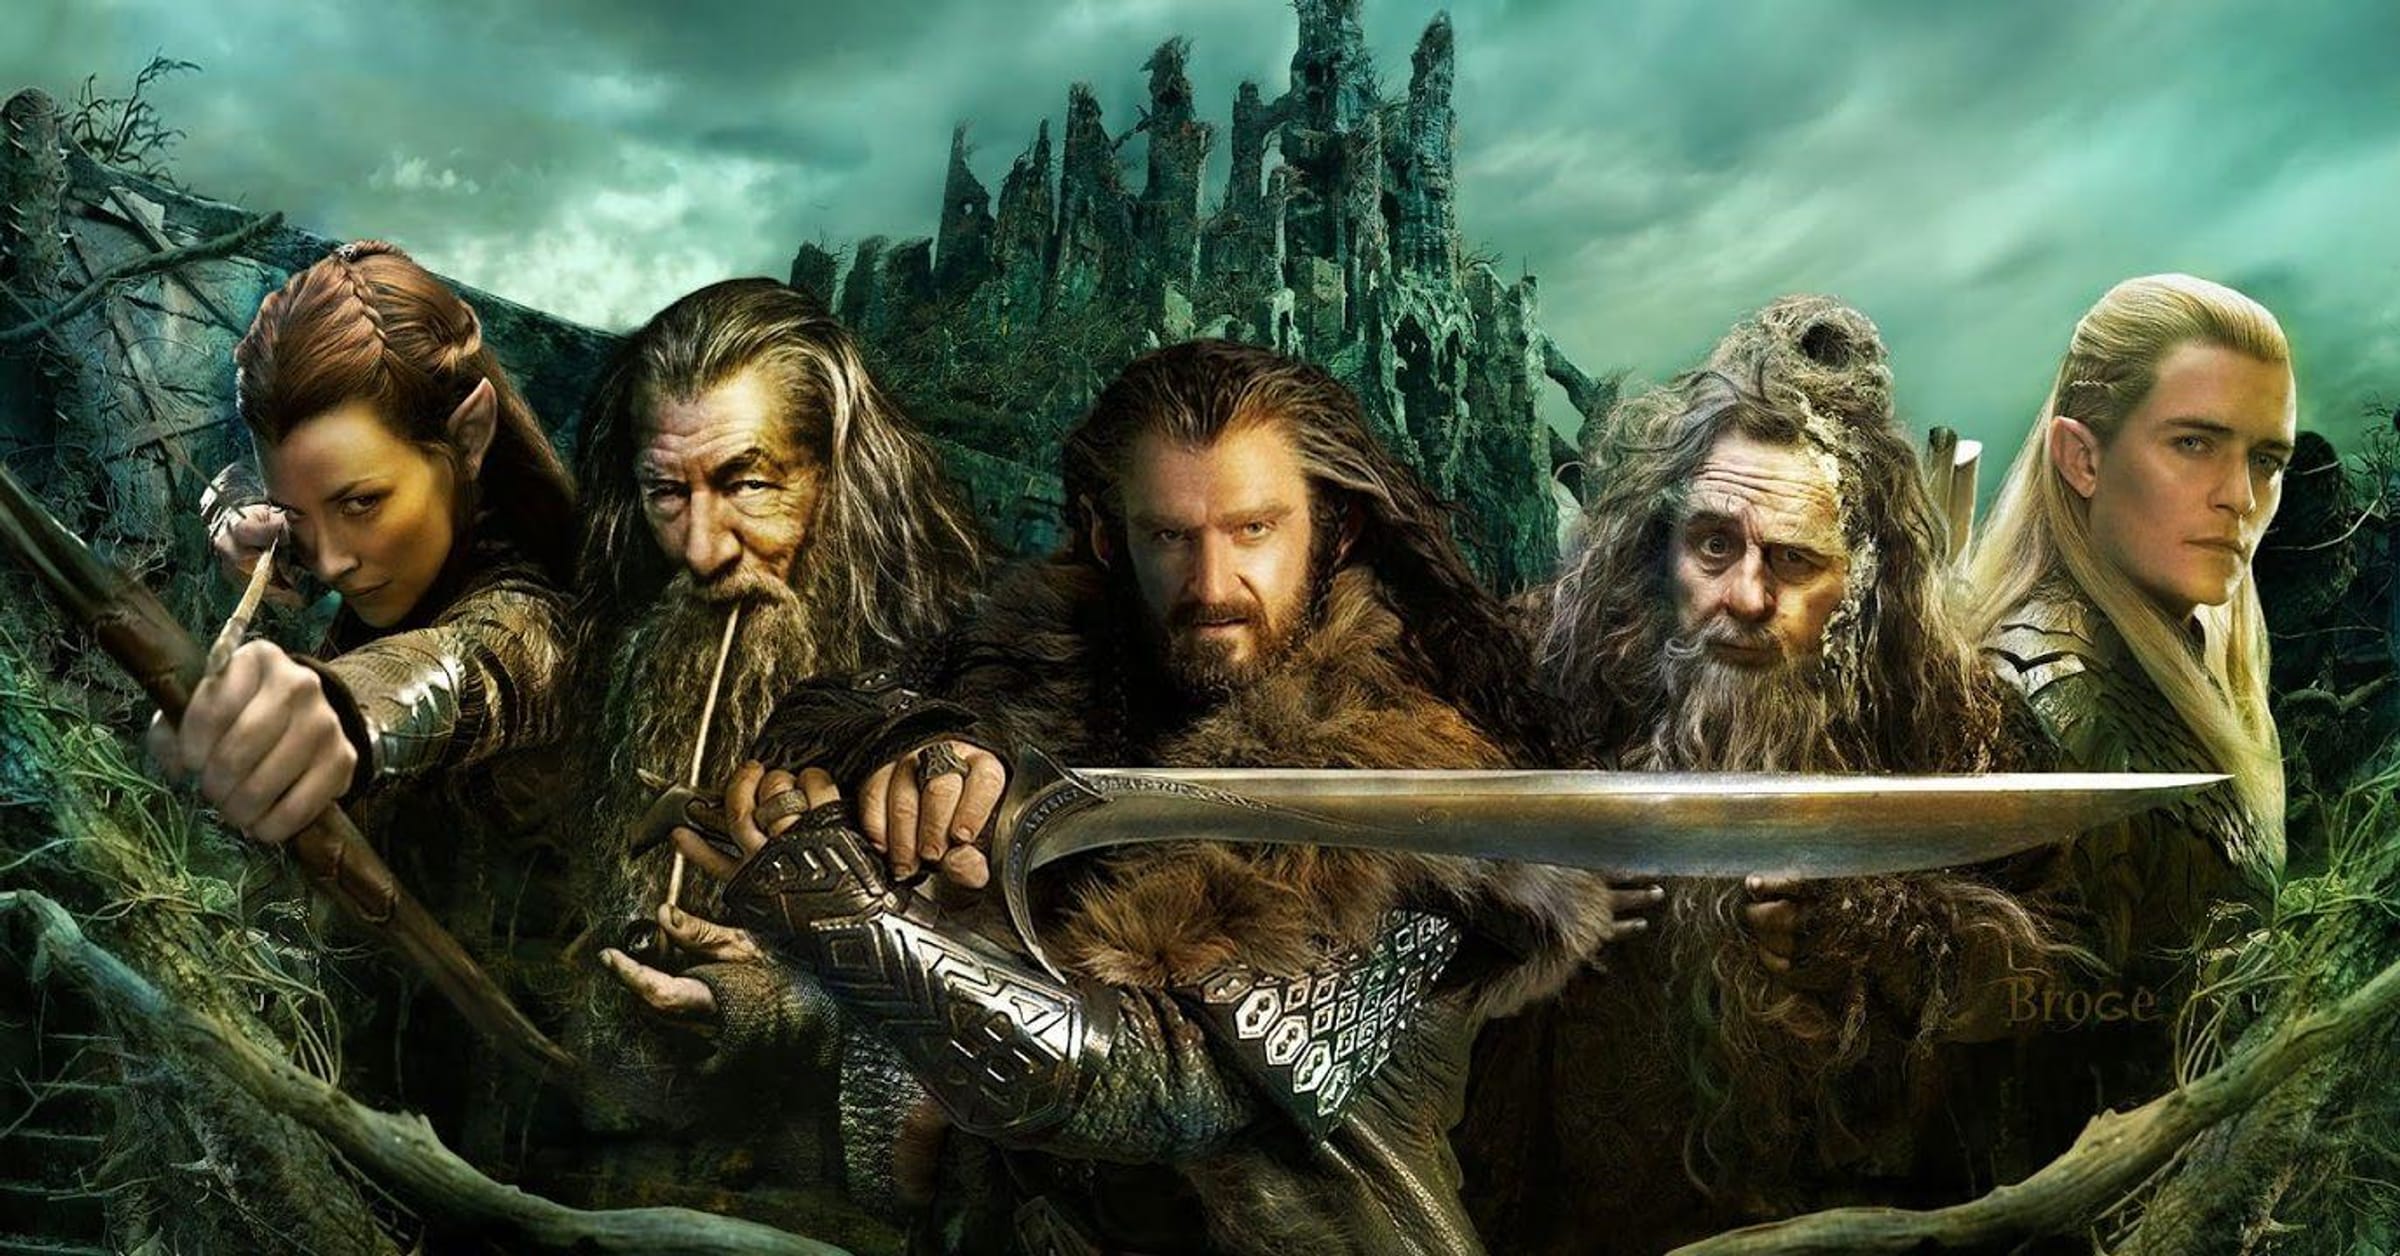 6 The Lord of the Rings & The Hobbit Movies Ranked 